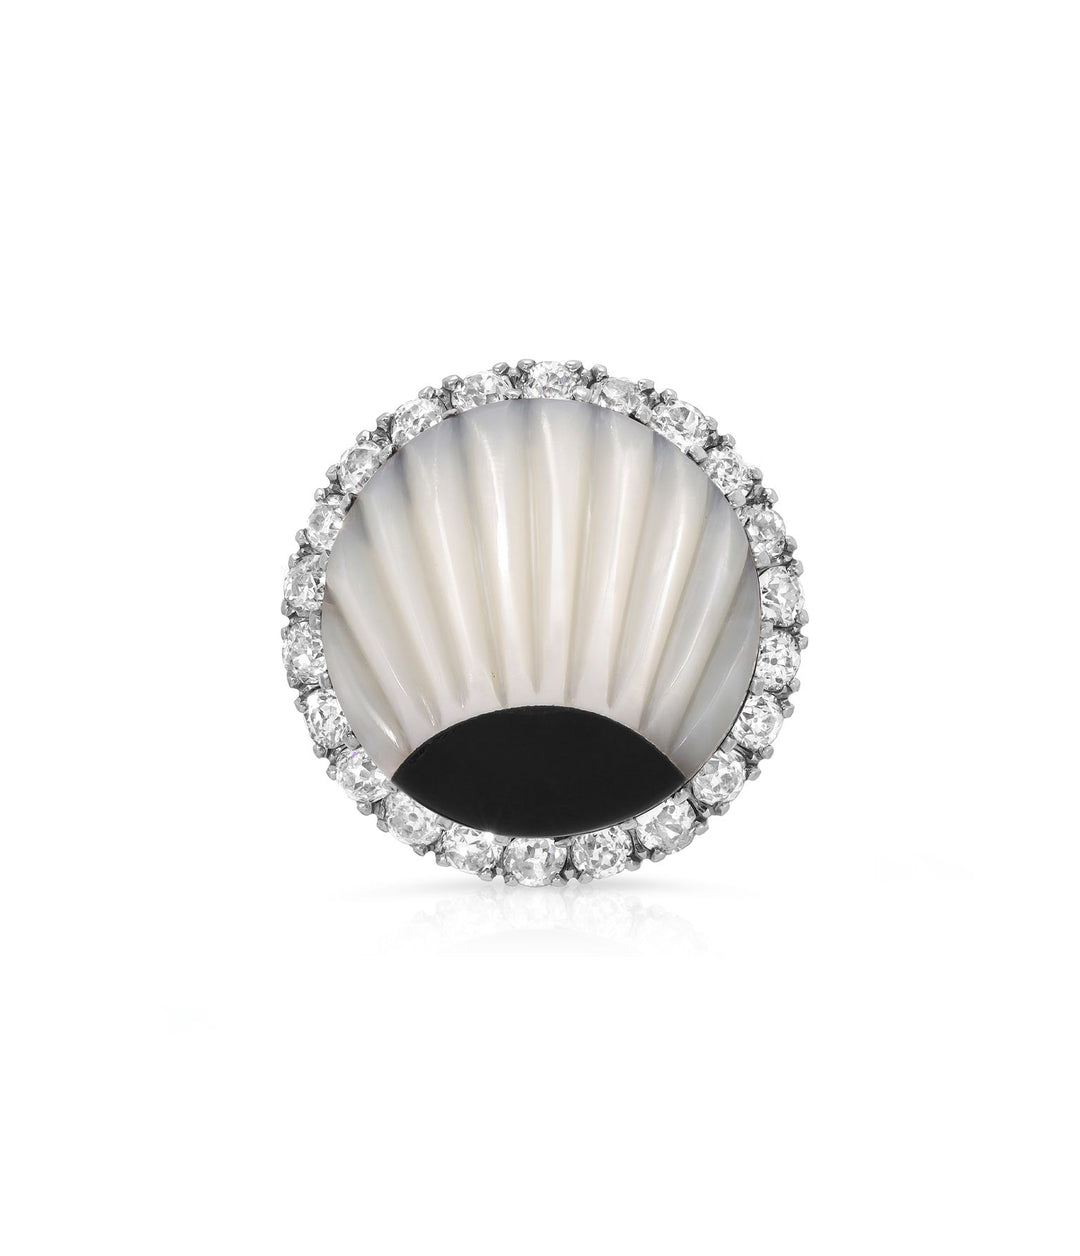 Mother of Pearl, Onyx and Diamond Shell Ring in 14K Gold